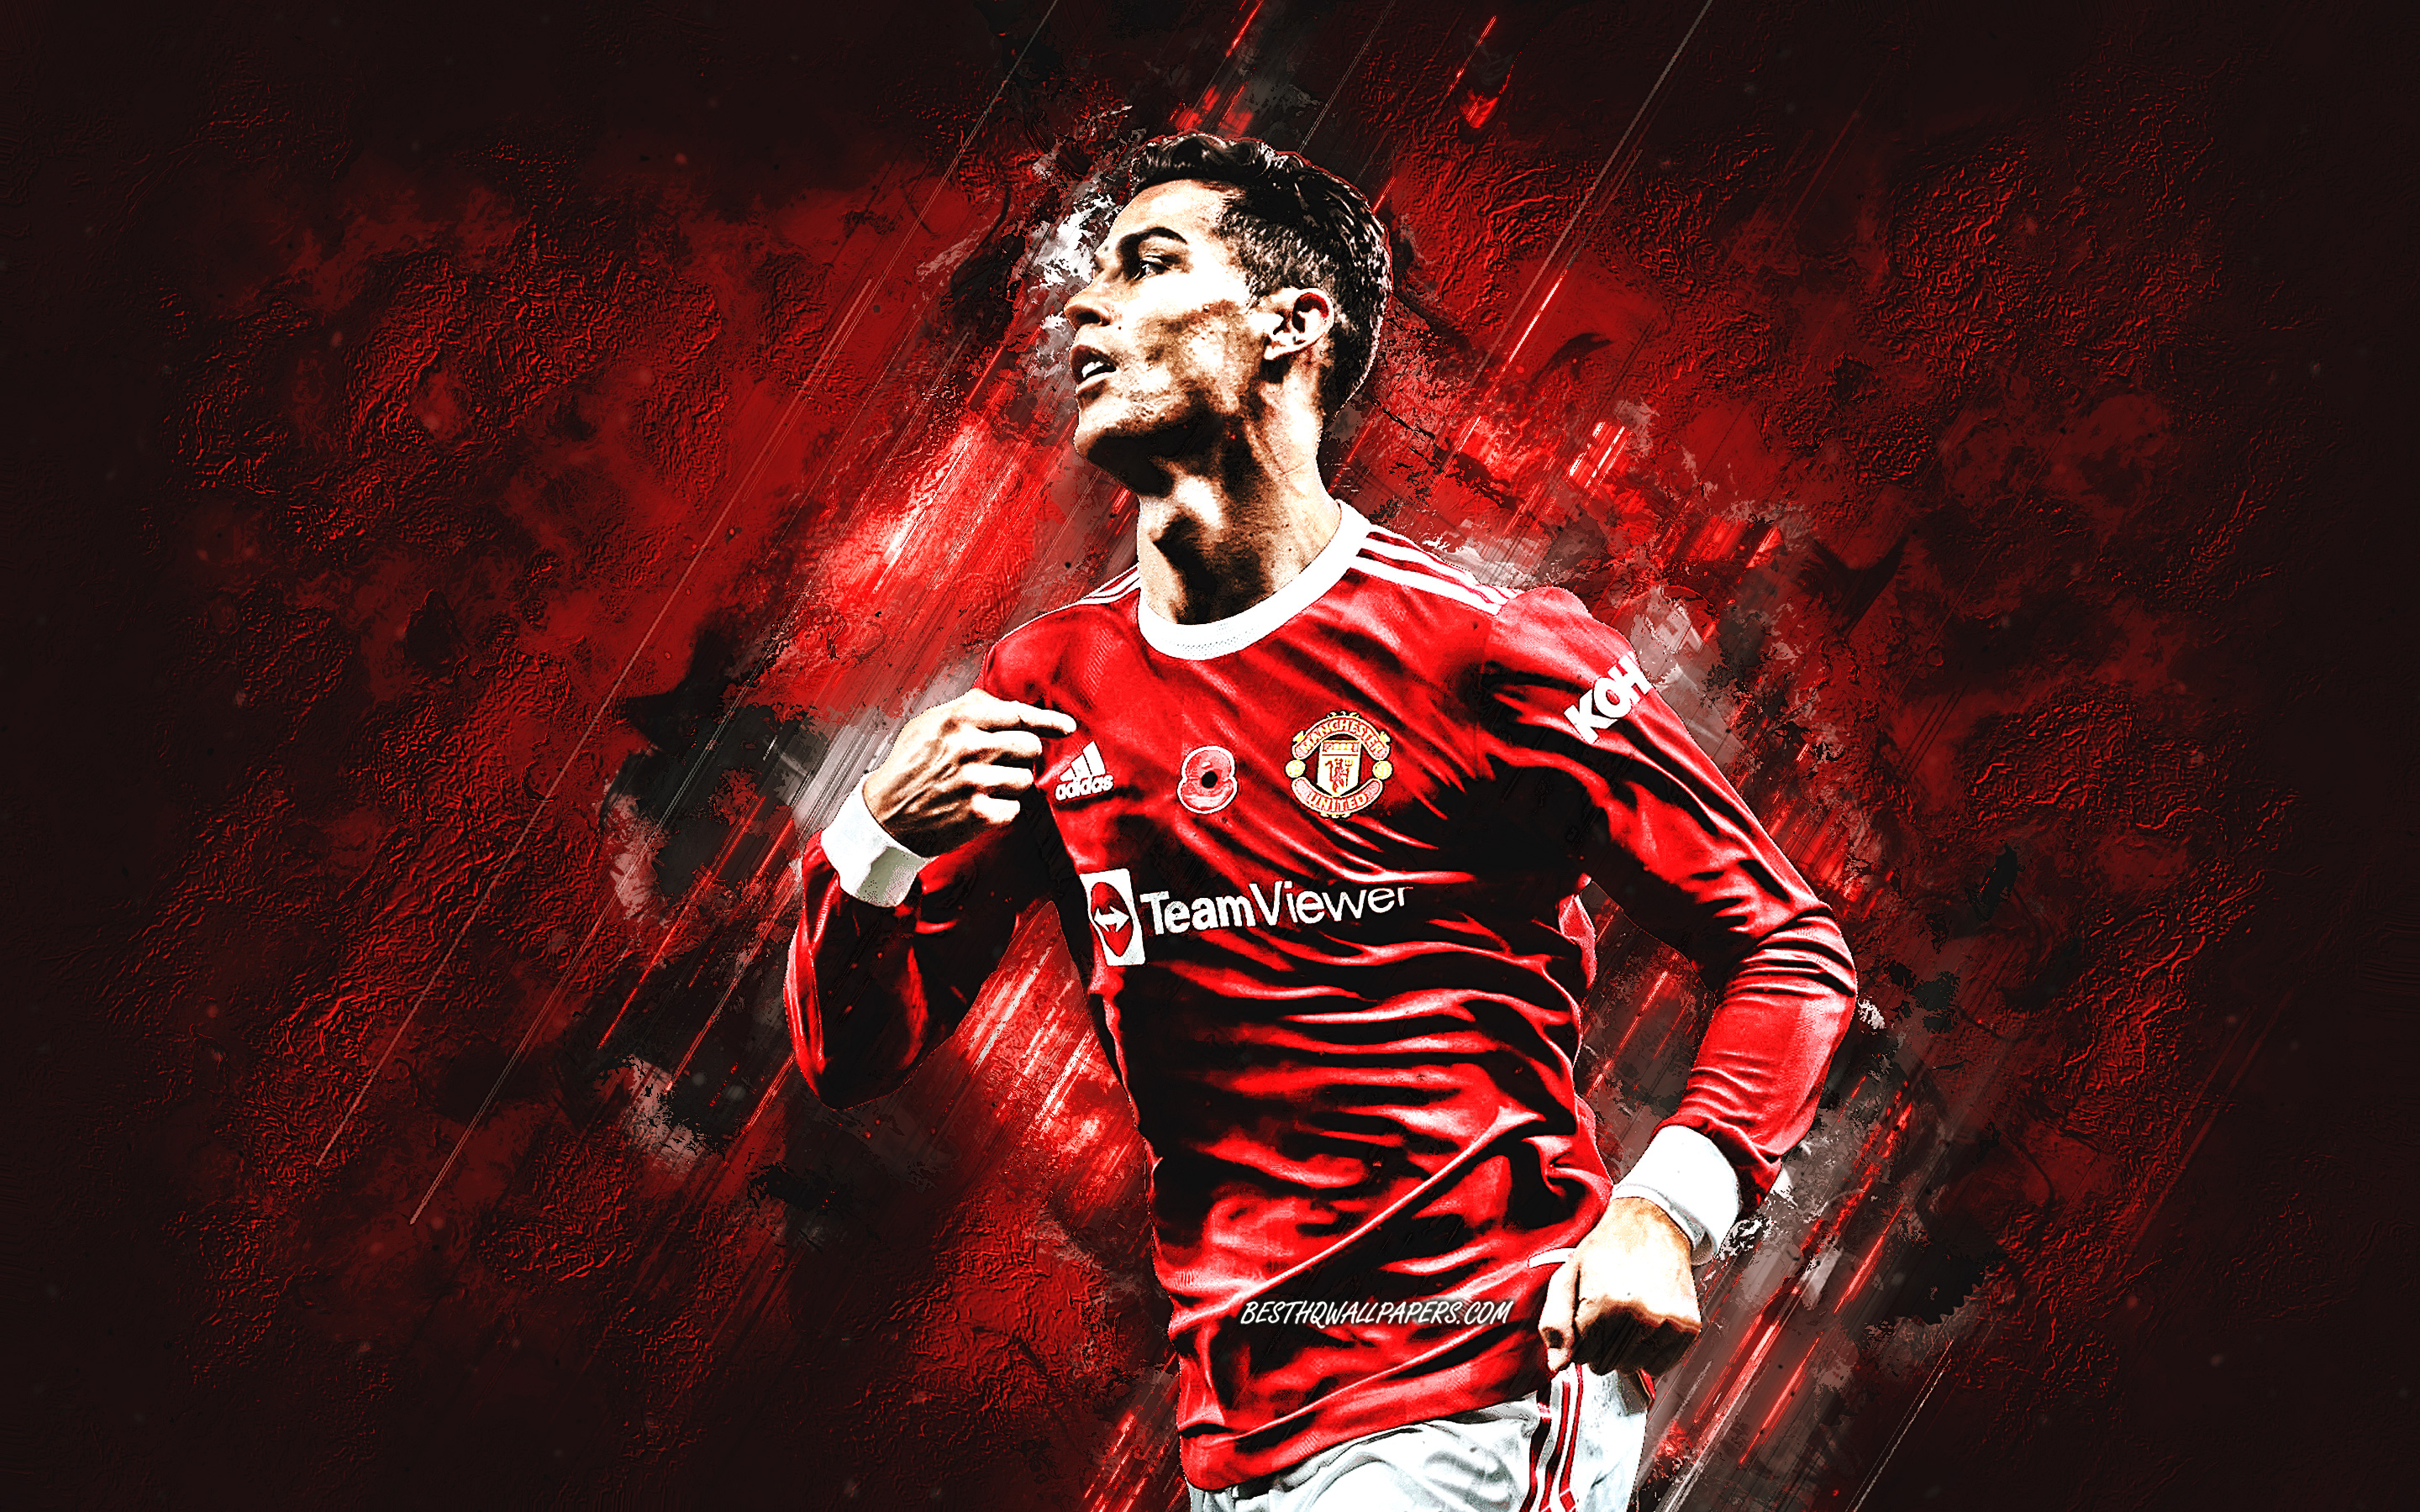 Download wallpaper Cristiano Ronaldo, Manchester United FC, portrait, world football star, Ronaldo Manchester United, Champions League, football, red stone background for desktop with resolution 2880x1800. High Quality HD picture wallpaper